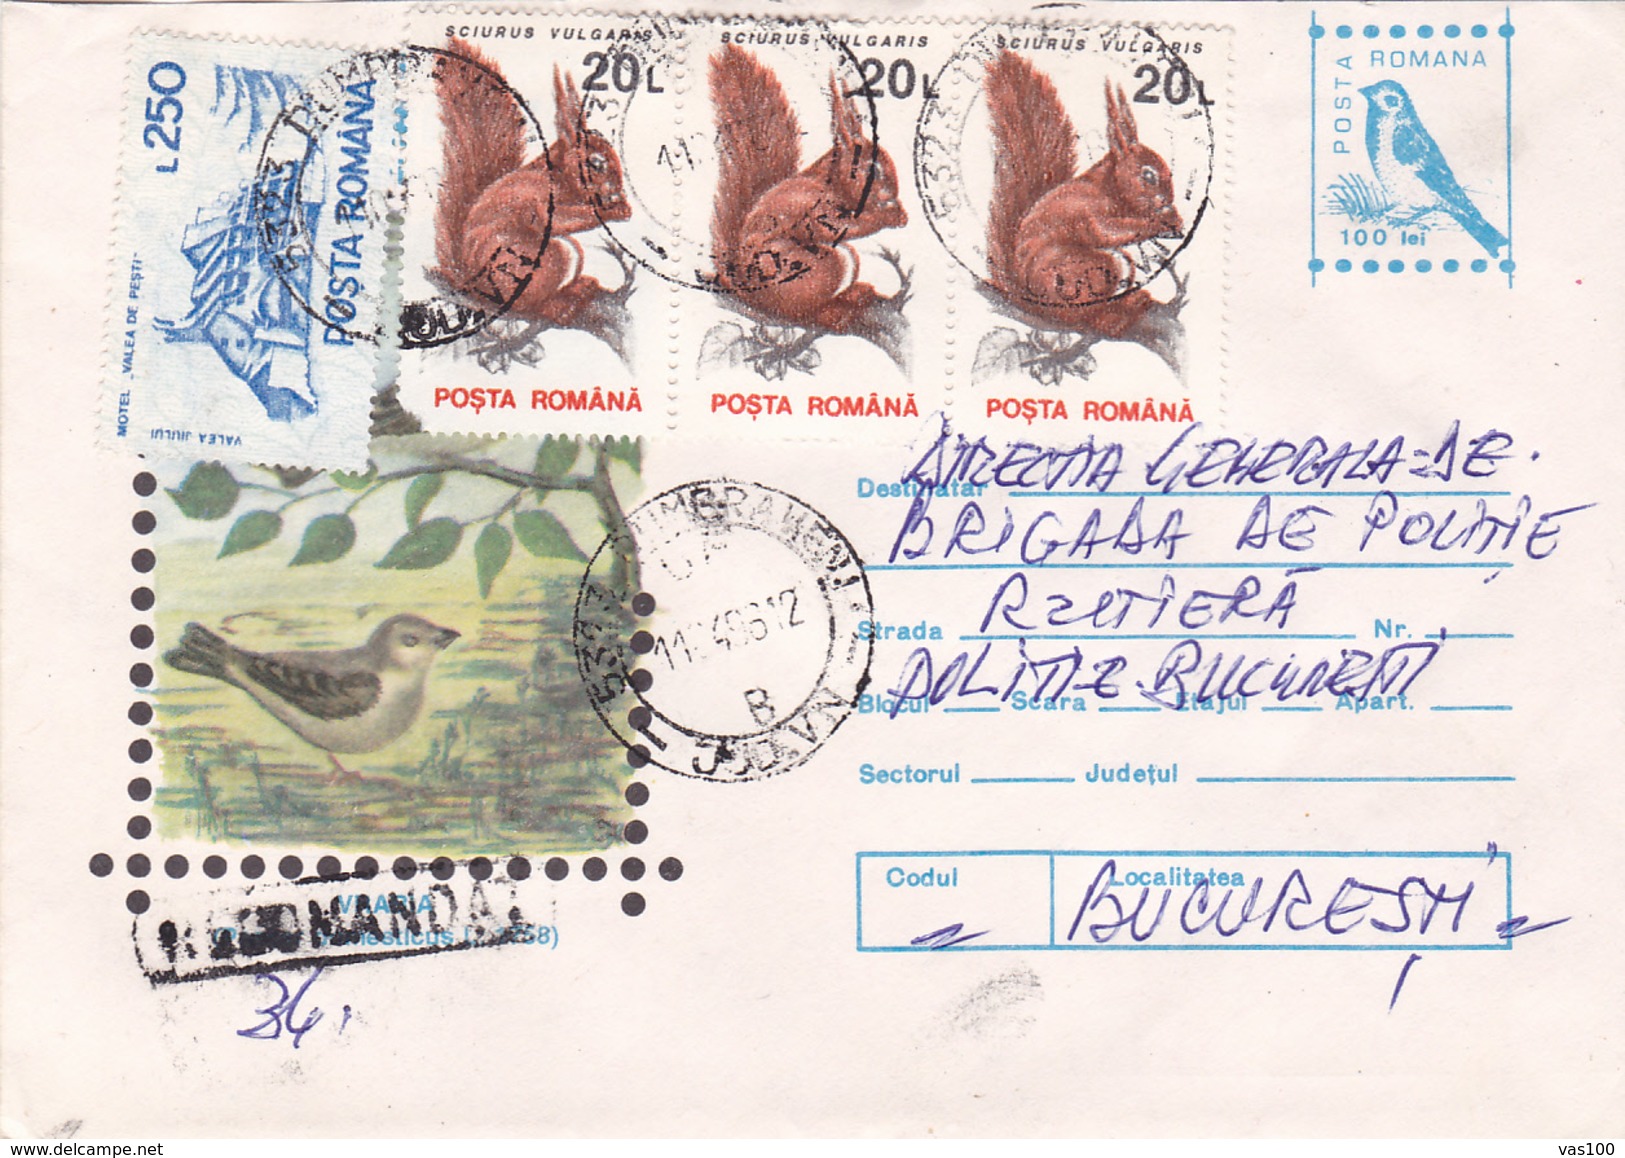 BV6817  ERROR, BIRDS, RARE COVERS STATIONERY,SHIFTED PICTURE, 1995 ROMANIA. - Errors, Freaks & Oddities (EFO)